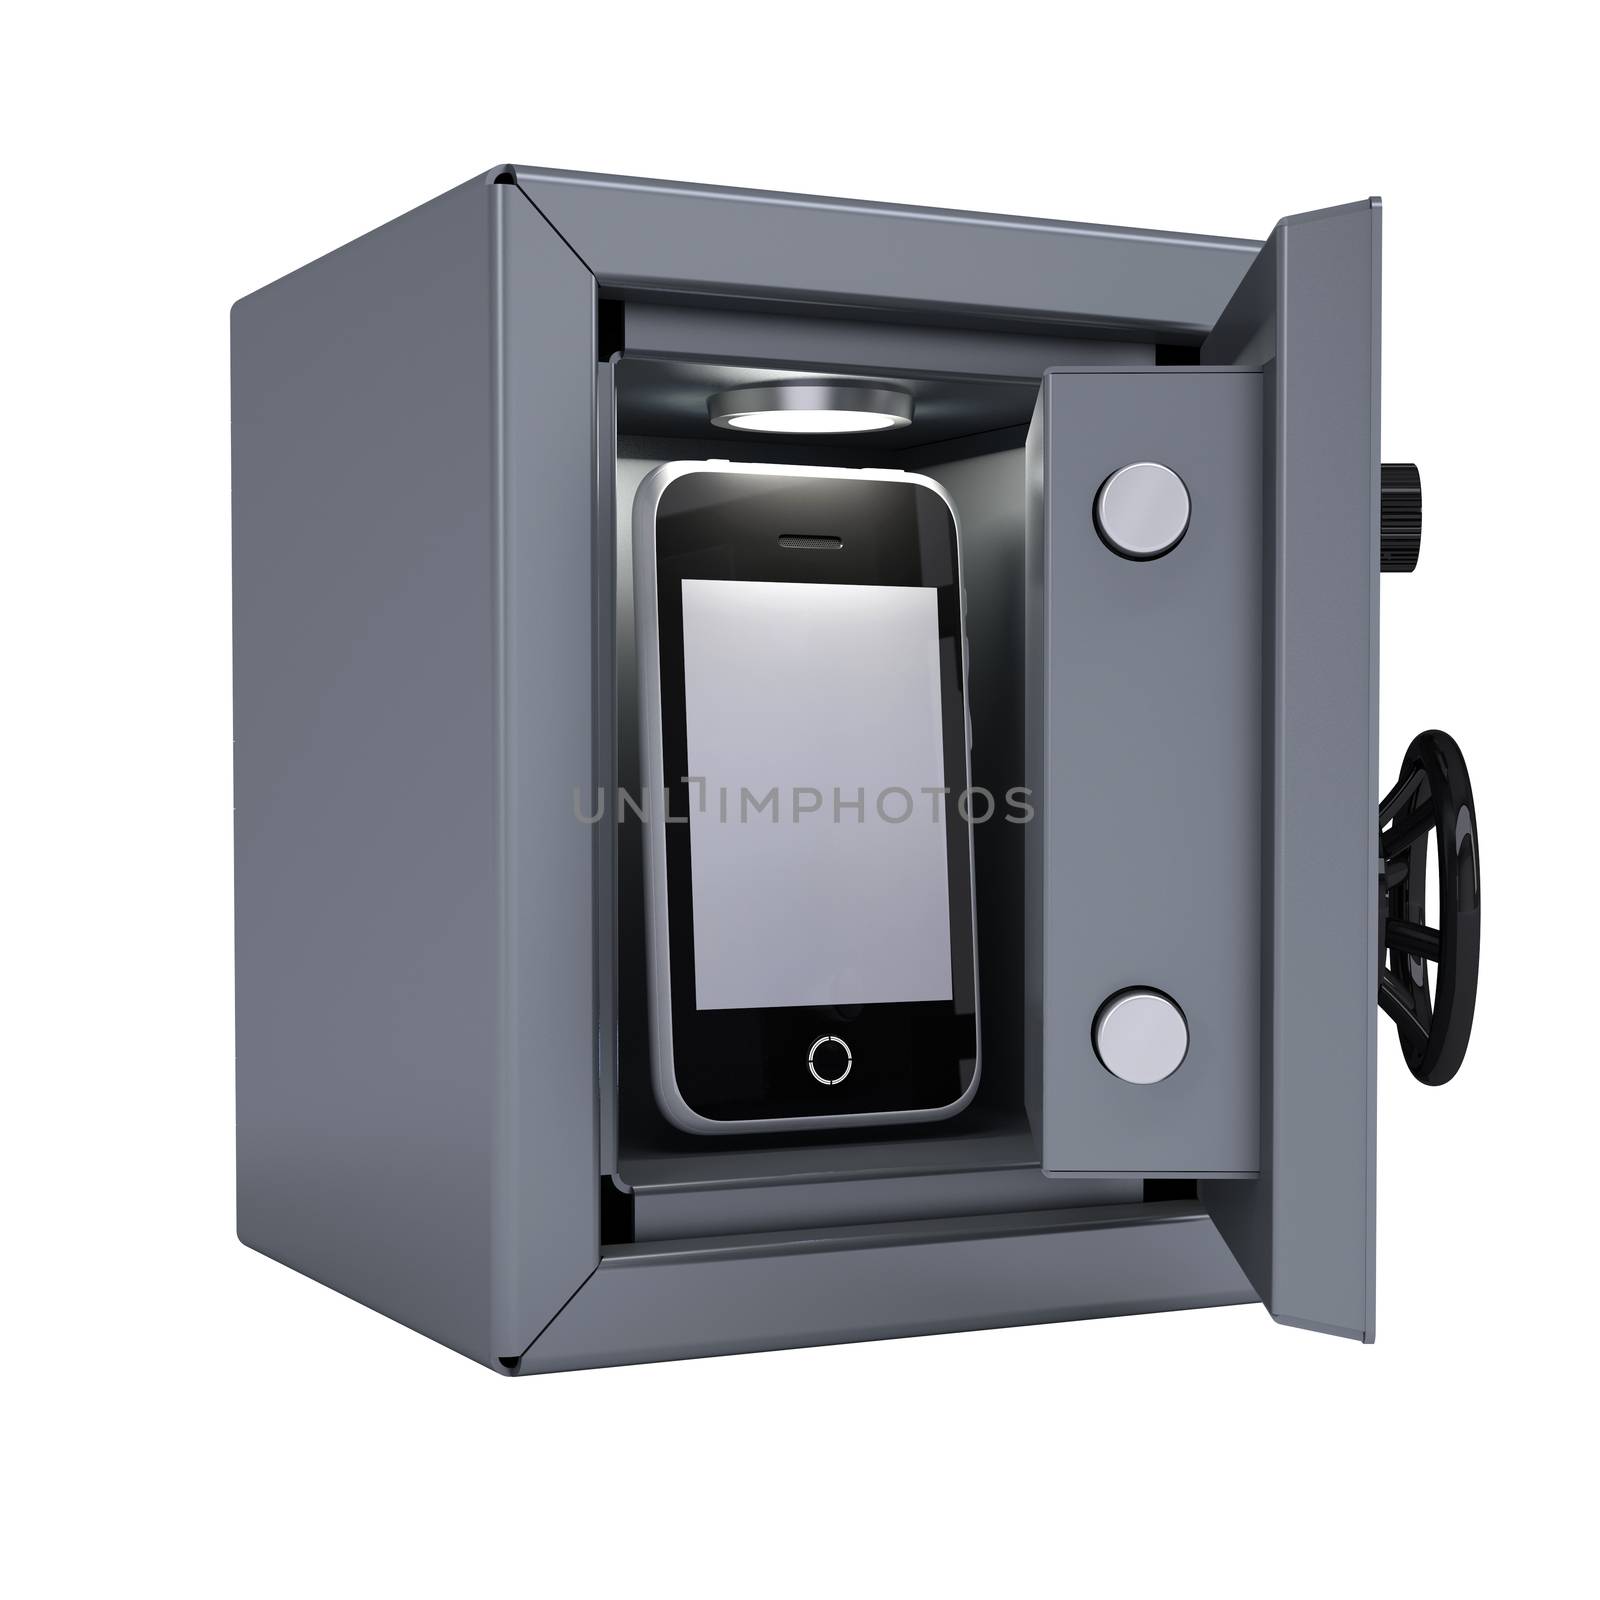 Smartphone in an open metal safe. Smartphone illuminated lamp. Isolated render on a white background